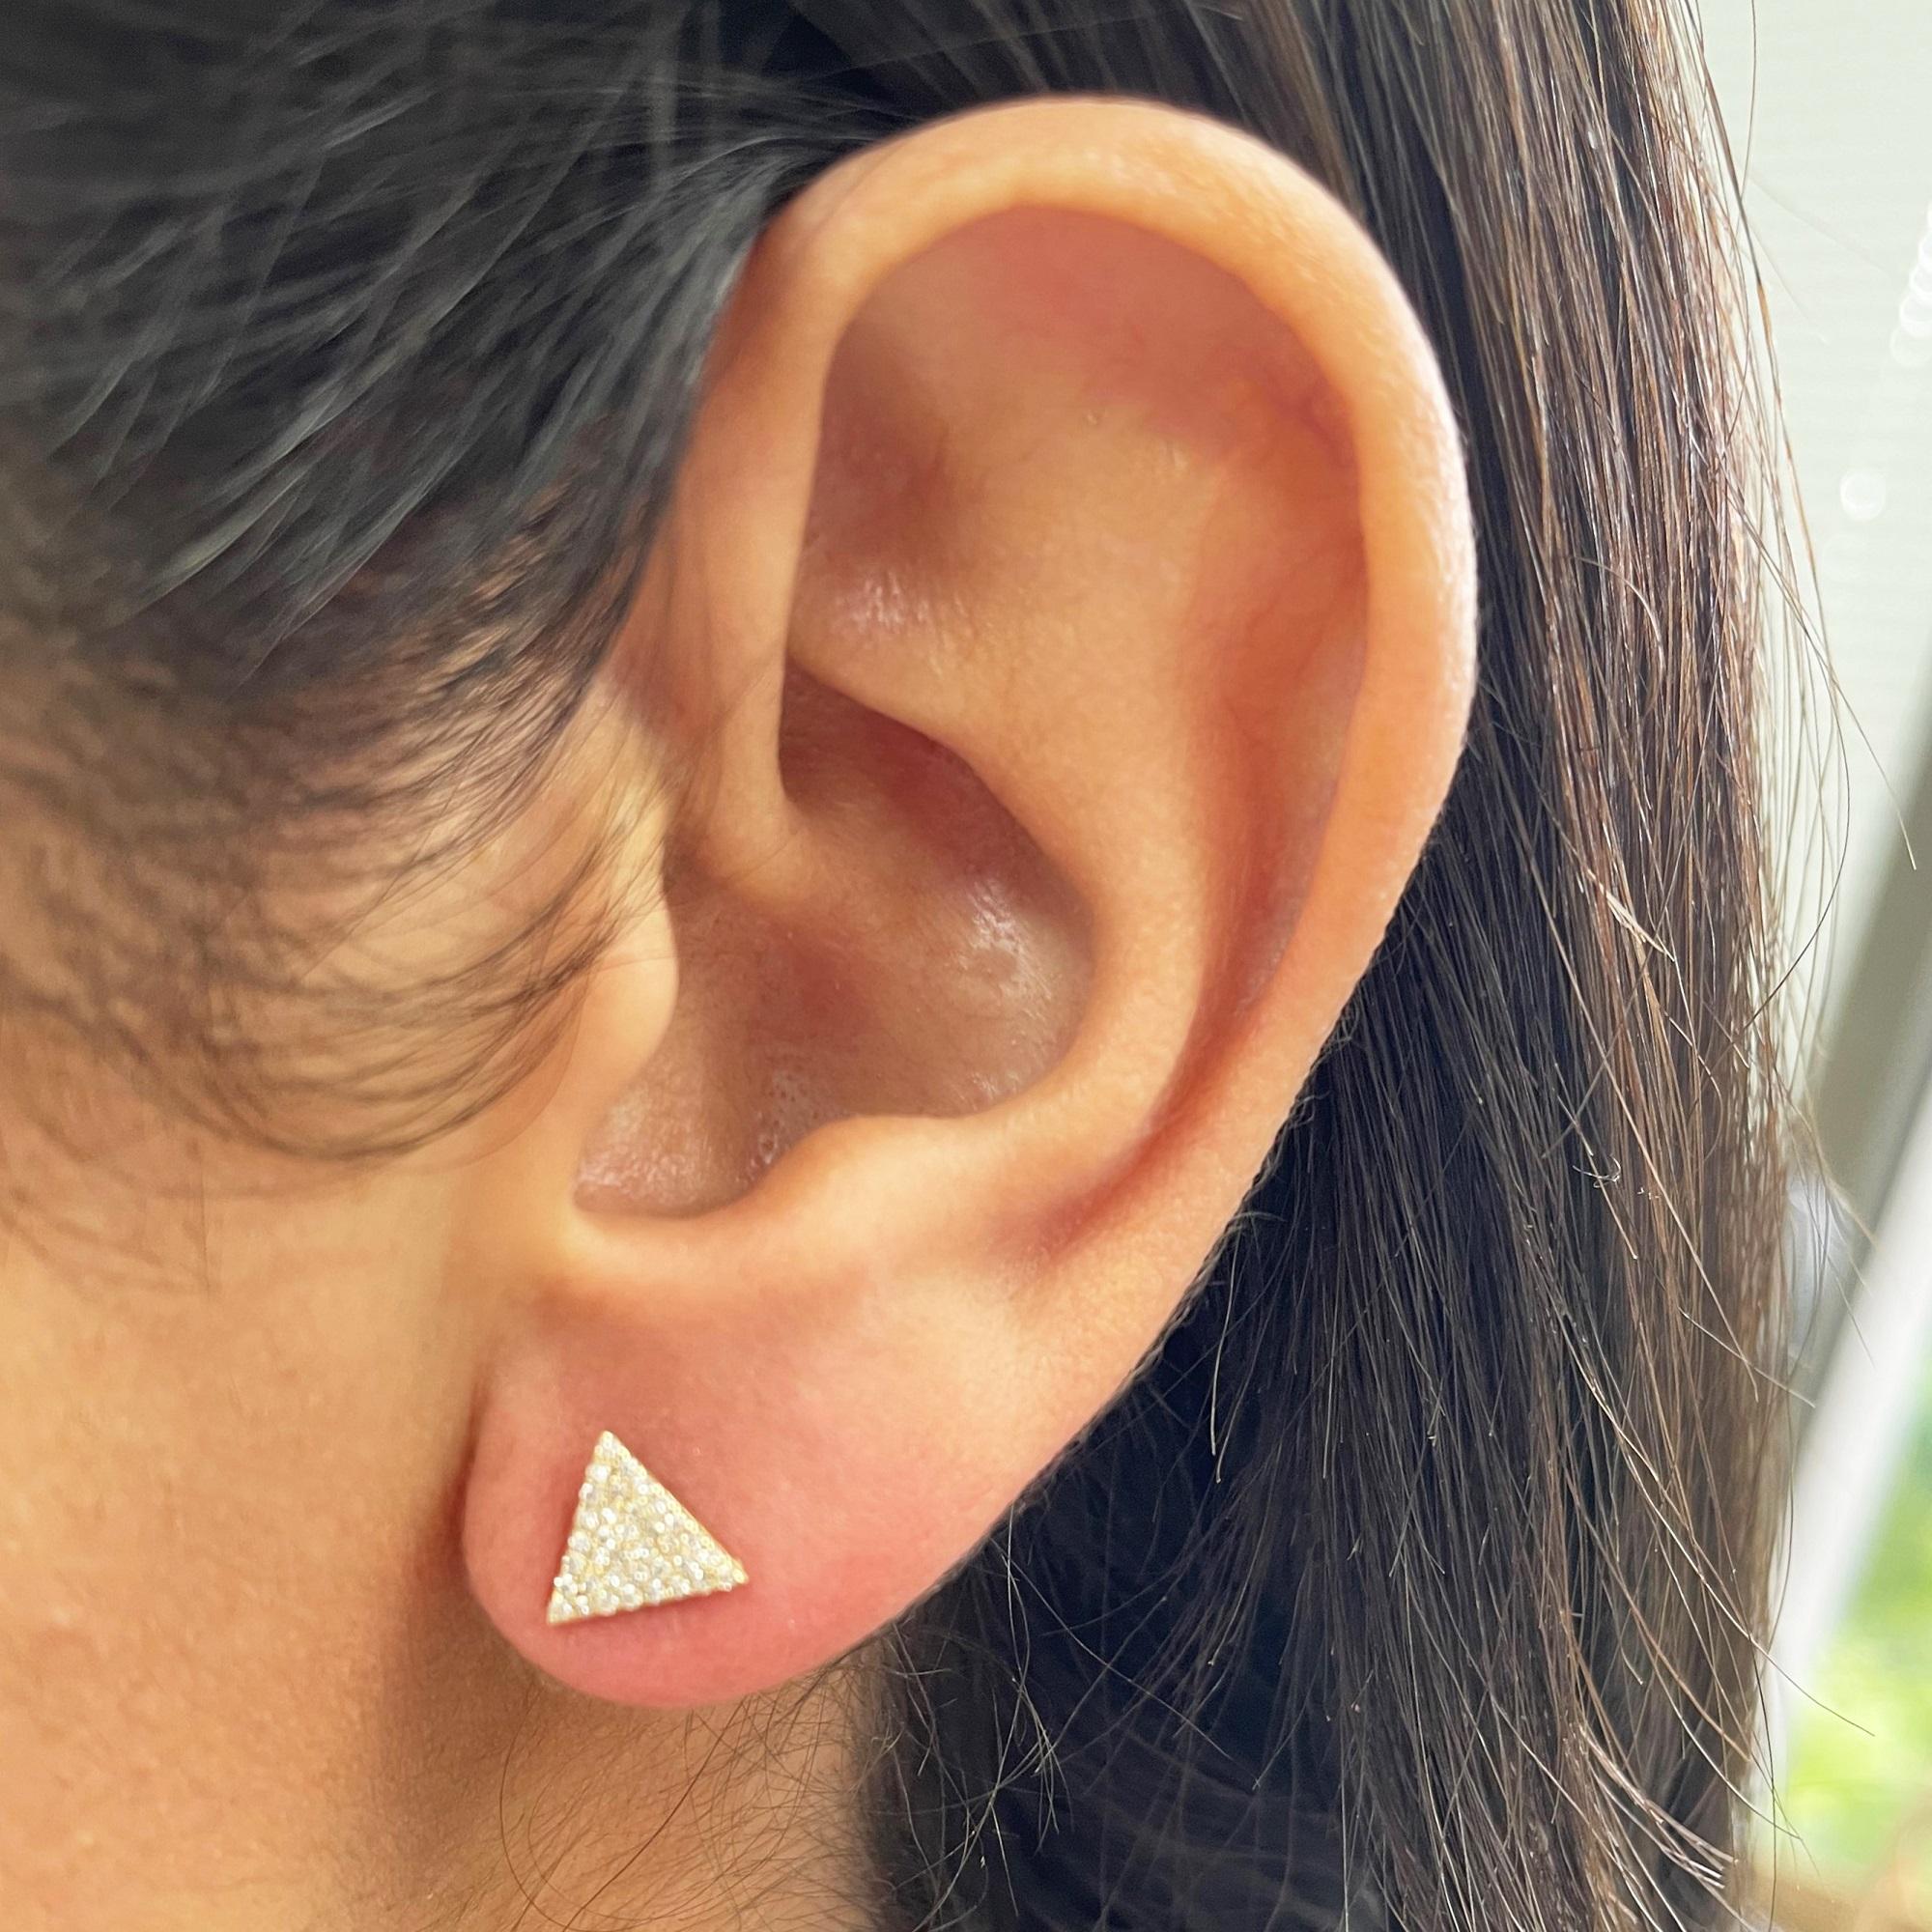 Pave Triangle Stud Earrings: Crafted of real 14k gold, these popular Pave Triangle Stud shape earrings feature 72 natural white sparkling diamonds approximately 0.21 ct. Certified diamonds. Diamond Color & Clarity GH-SI1 Measures approximately 1/2